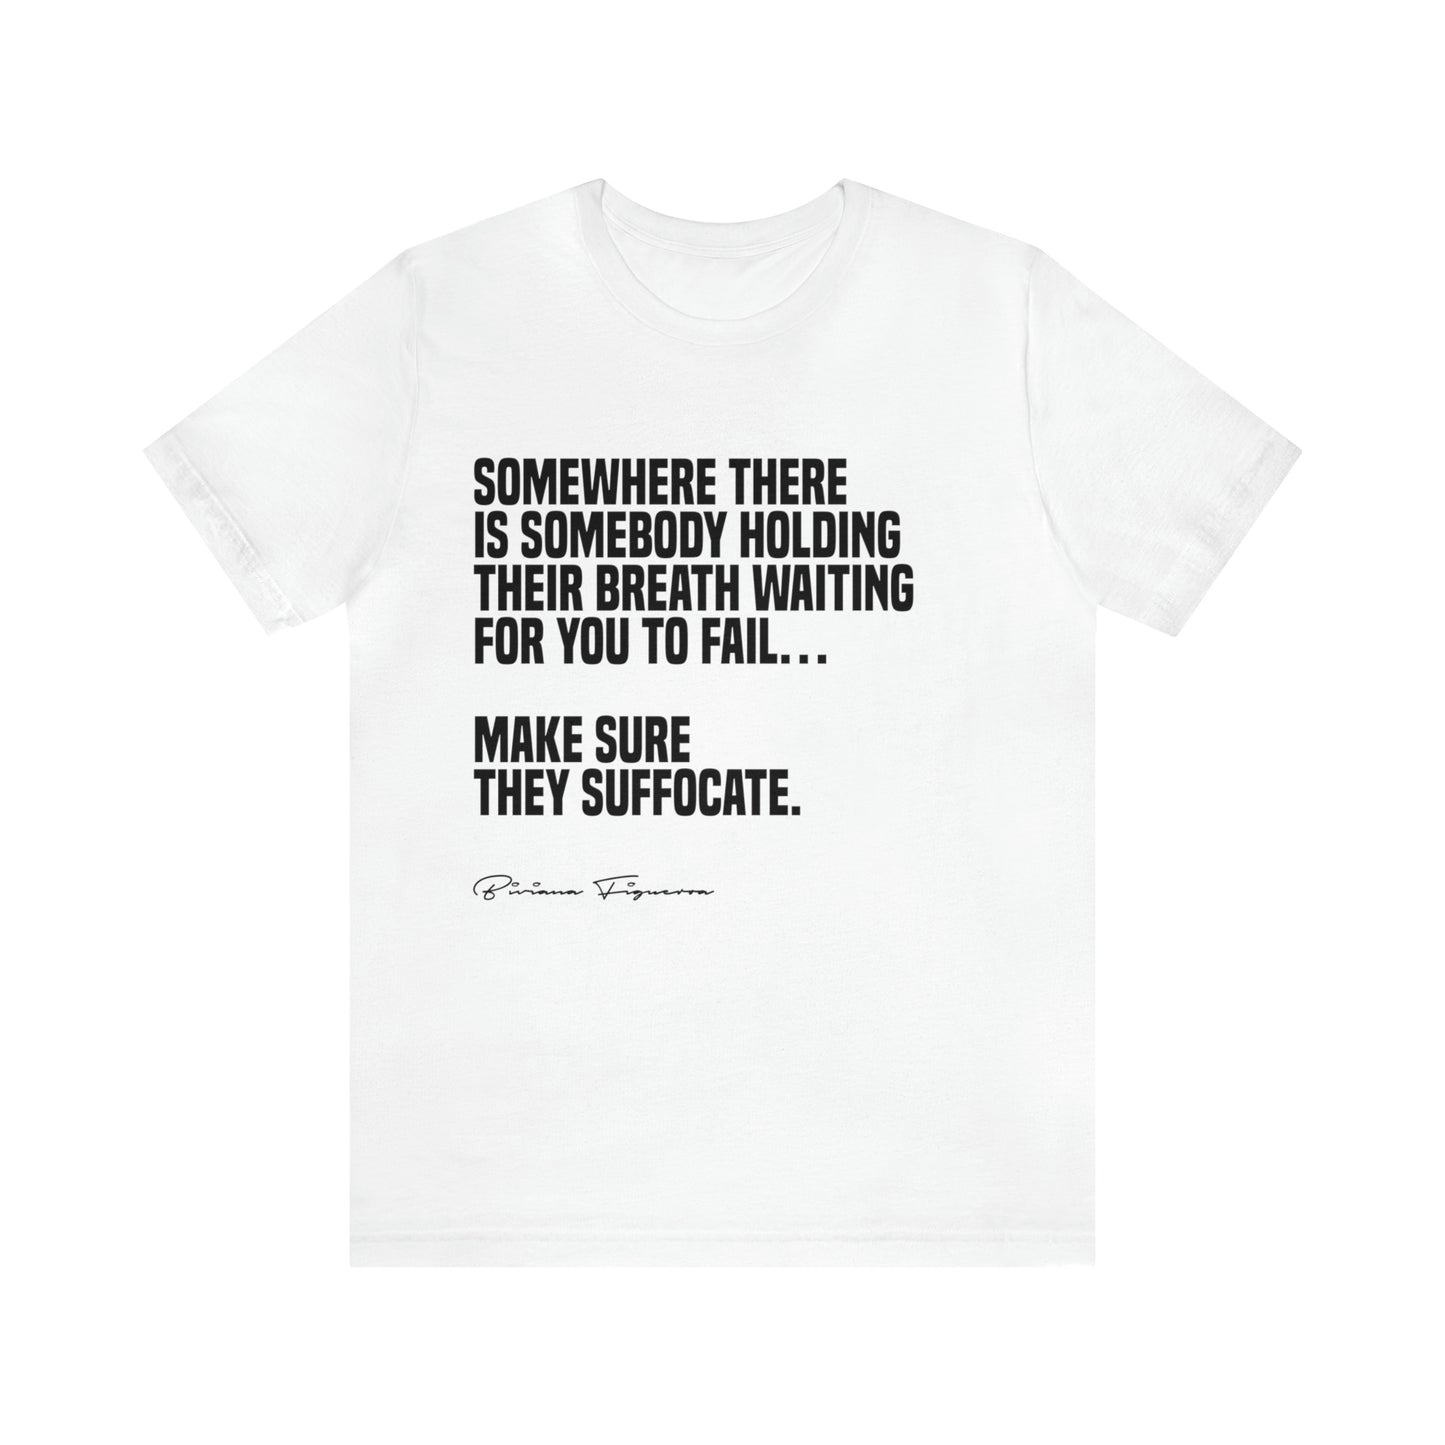 Biviana Figueroa: Somewhere There is Somebody Holding Their Breath Waiting For You to Fail… Make Sure They Suffocate Tee